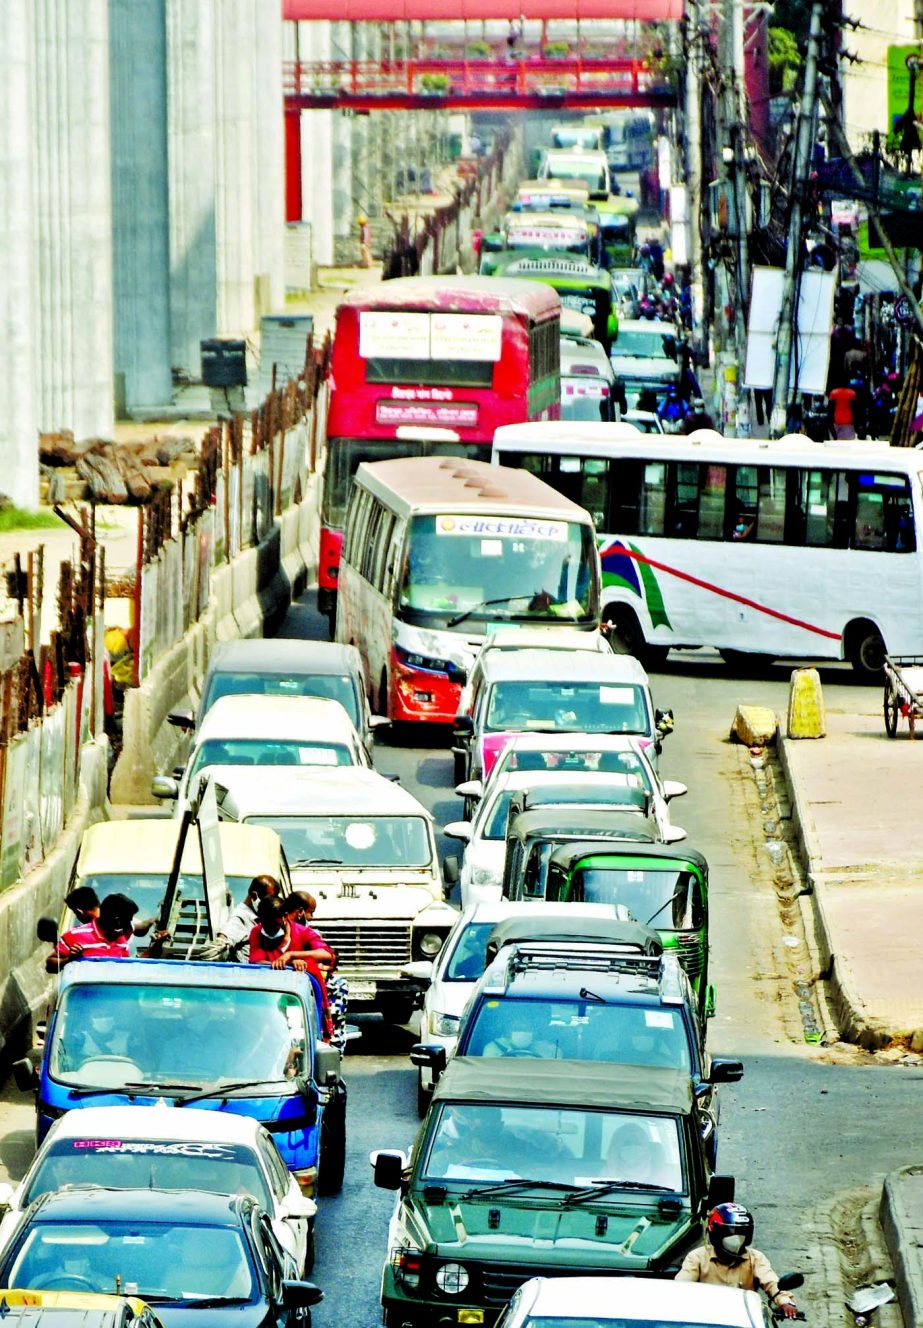 The city dwellers witness traffic congestion on Wednesday in different city parts including Farmgate after the government relaxed sanction barely two days after it imposed on public buses with immediate effect.